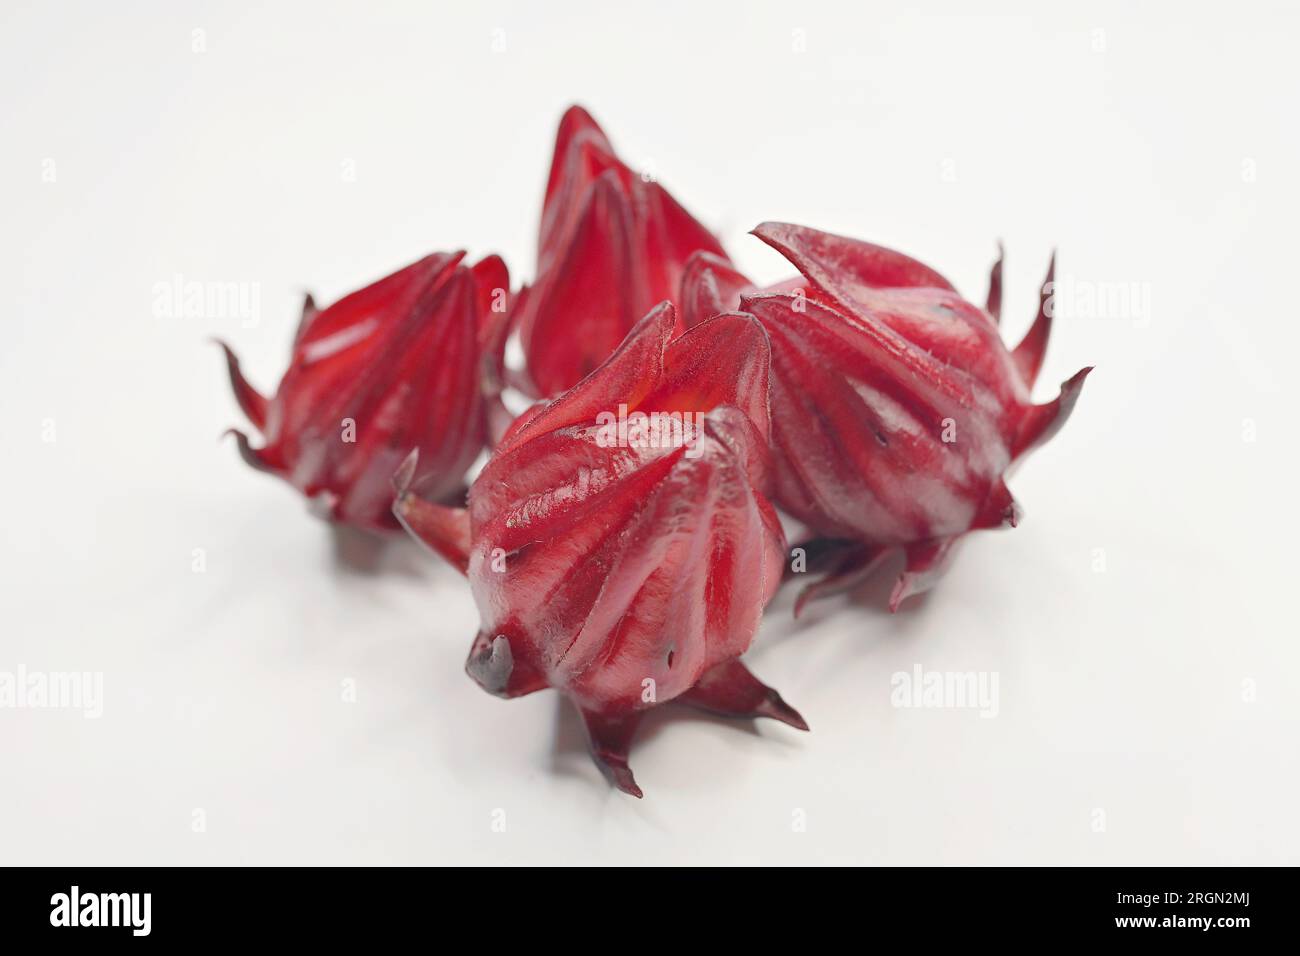 Roselle (H. sabdariffa) is a species of Hibiscus native to Africa. It is used for the production of bast fibre, while the red calyces can be infused i Stock Photo